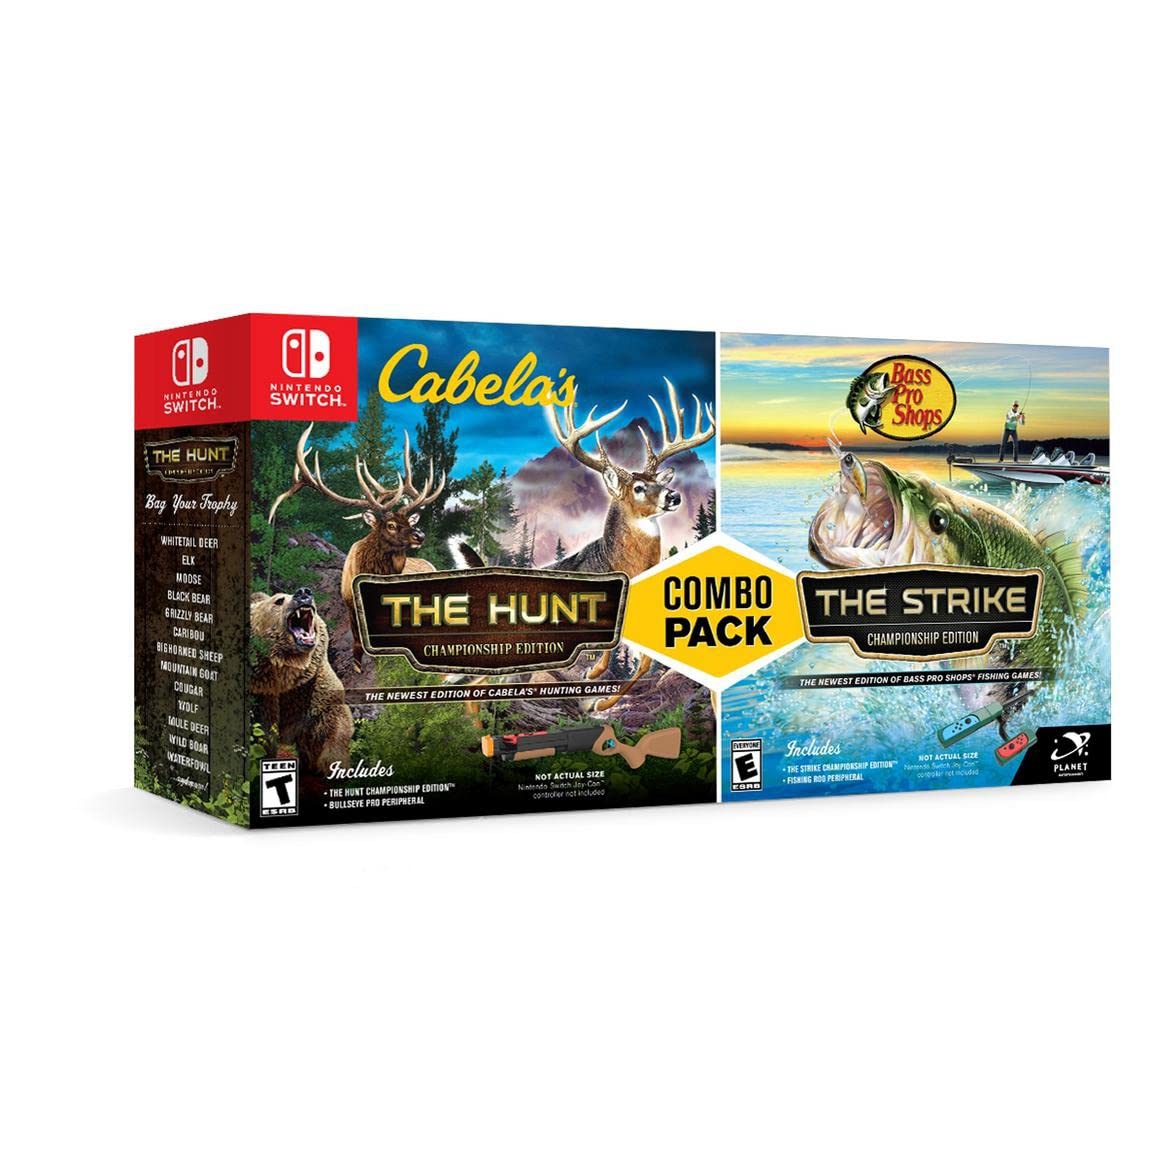 TGDB - Browse - Game - Cabela's The Hunt & Bass Pro Shops The